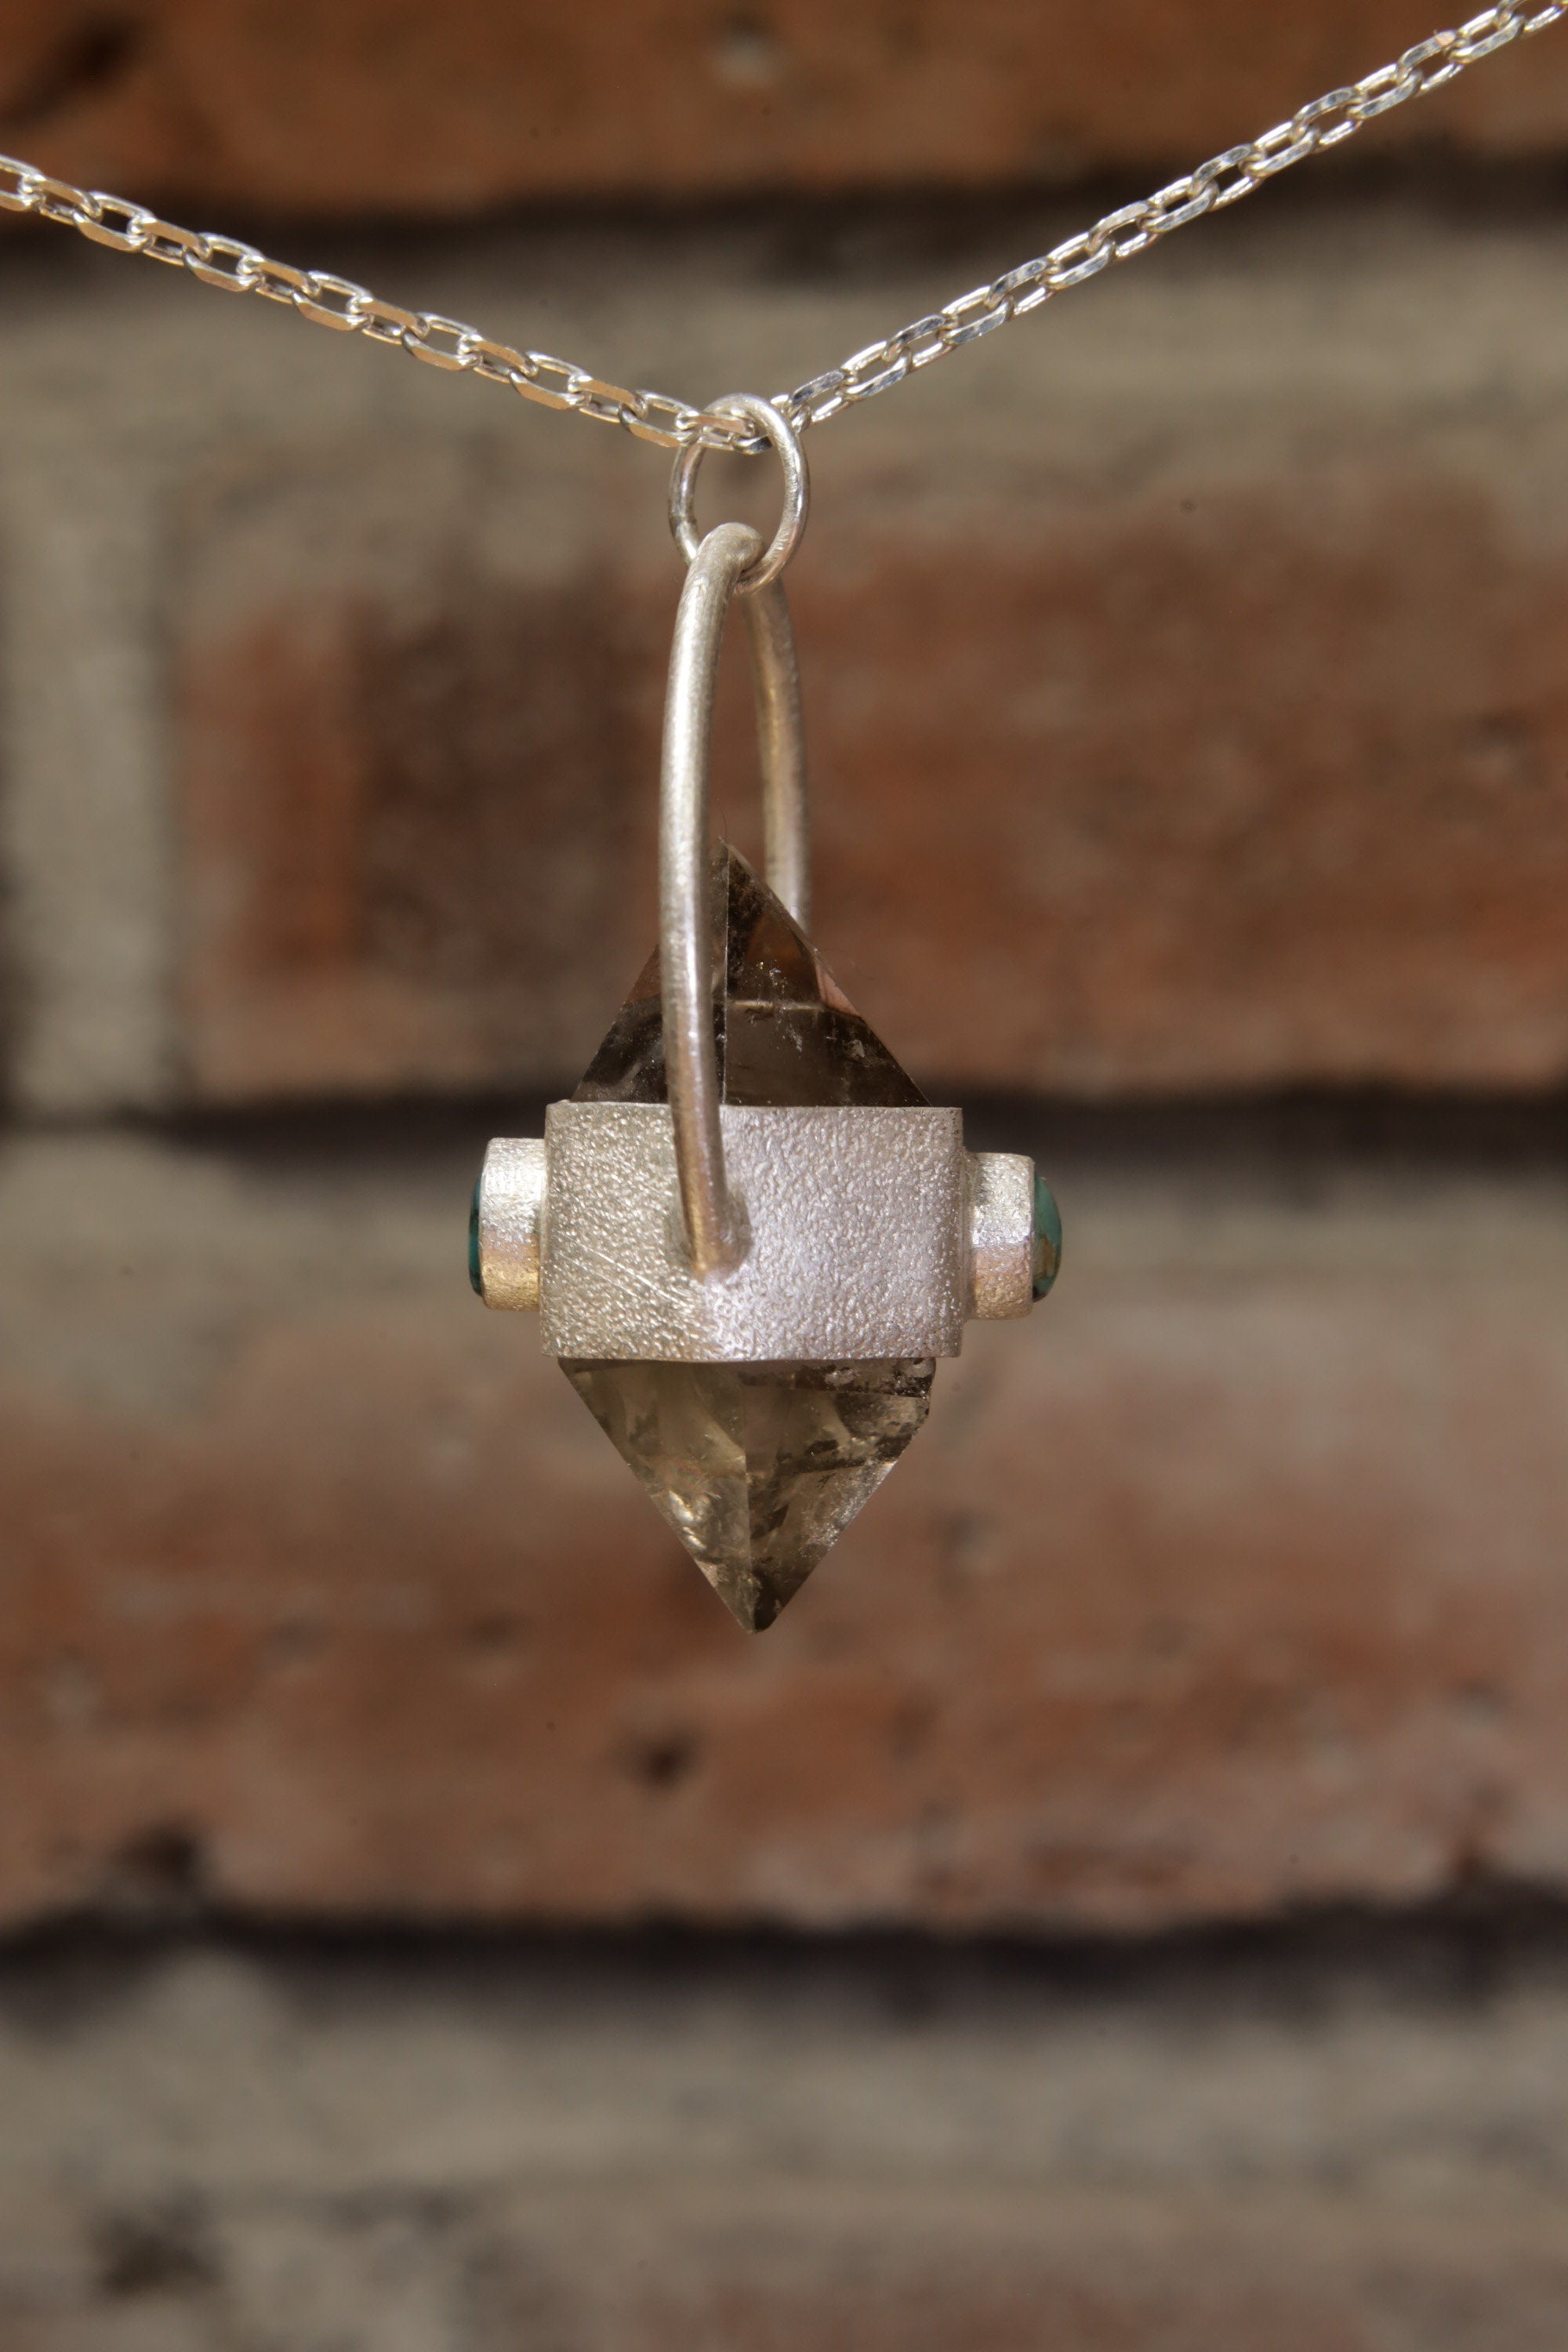 Earthen Radiance: Sterling Silver Sand-Textured Crystal Pendant with Double Terminated Cut Smokey Quartz and Persian Turquoise